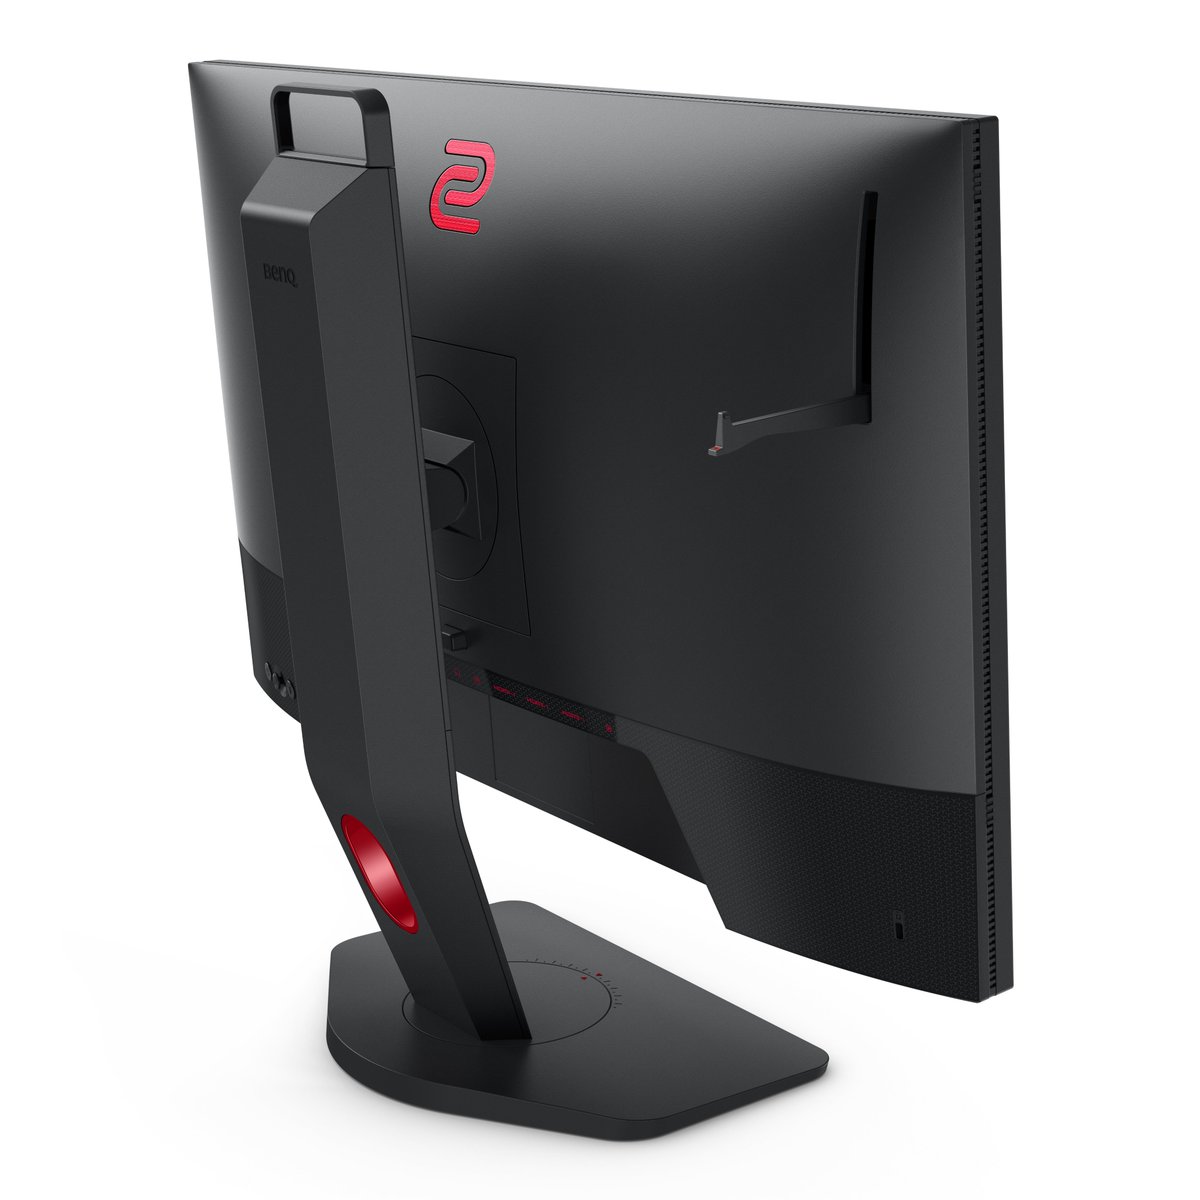 ZOWIE e-Sports Europe on Twitter: "We know some people are asking for  XL2540K recently. We are happy to say that XL2540K 240Hz monitor is on the  way to Europe and it will